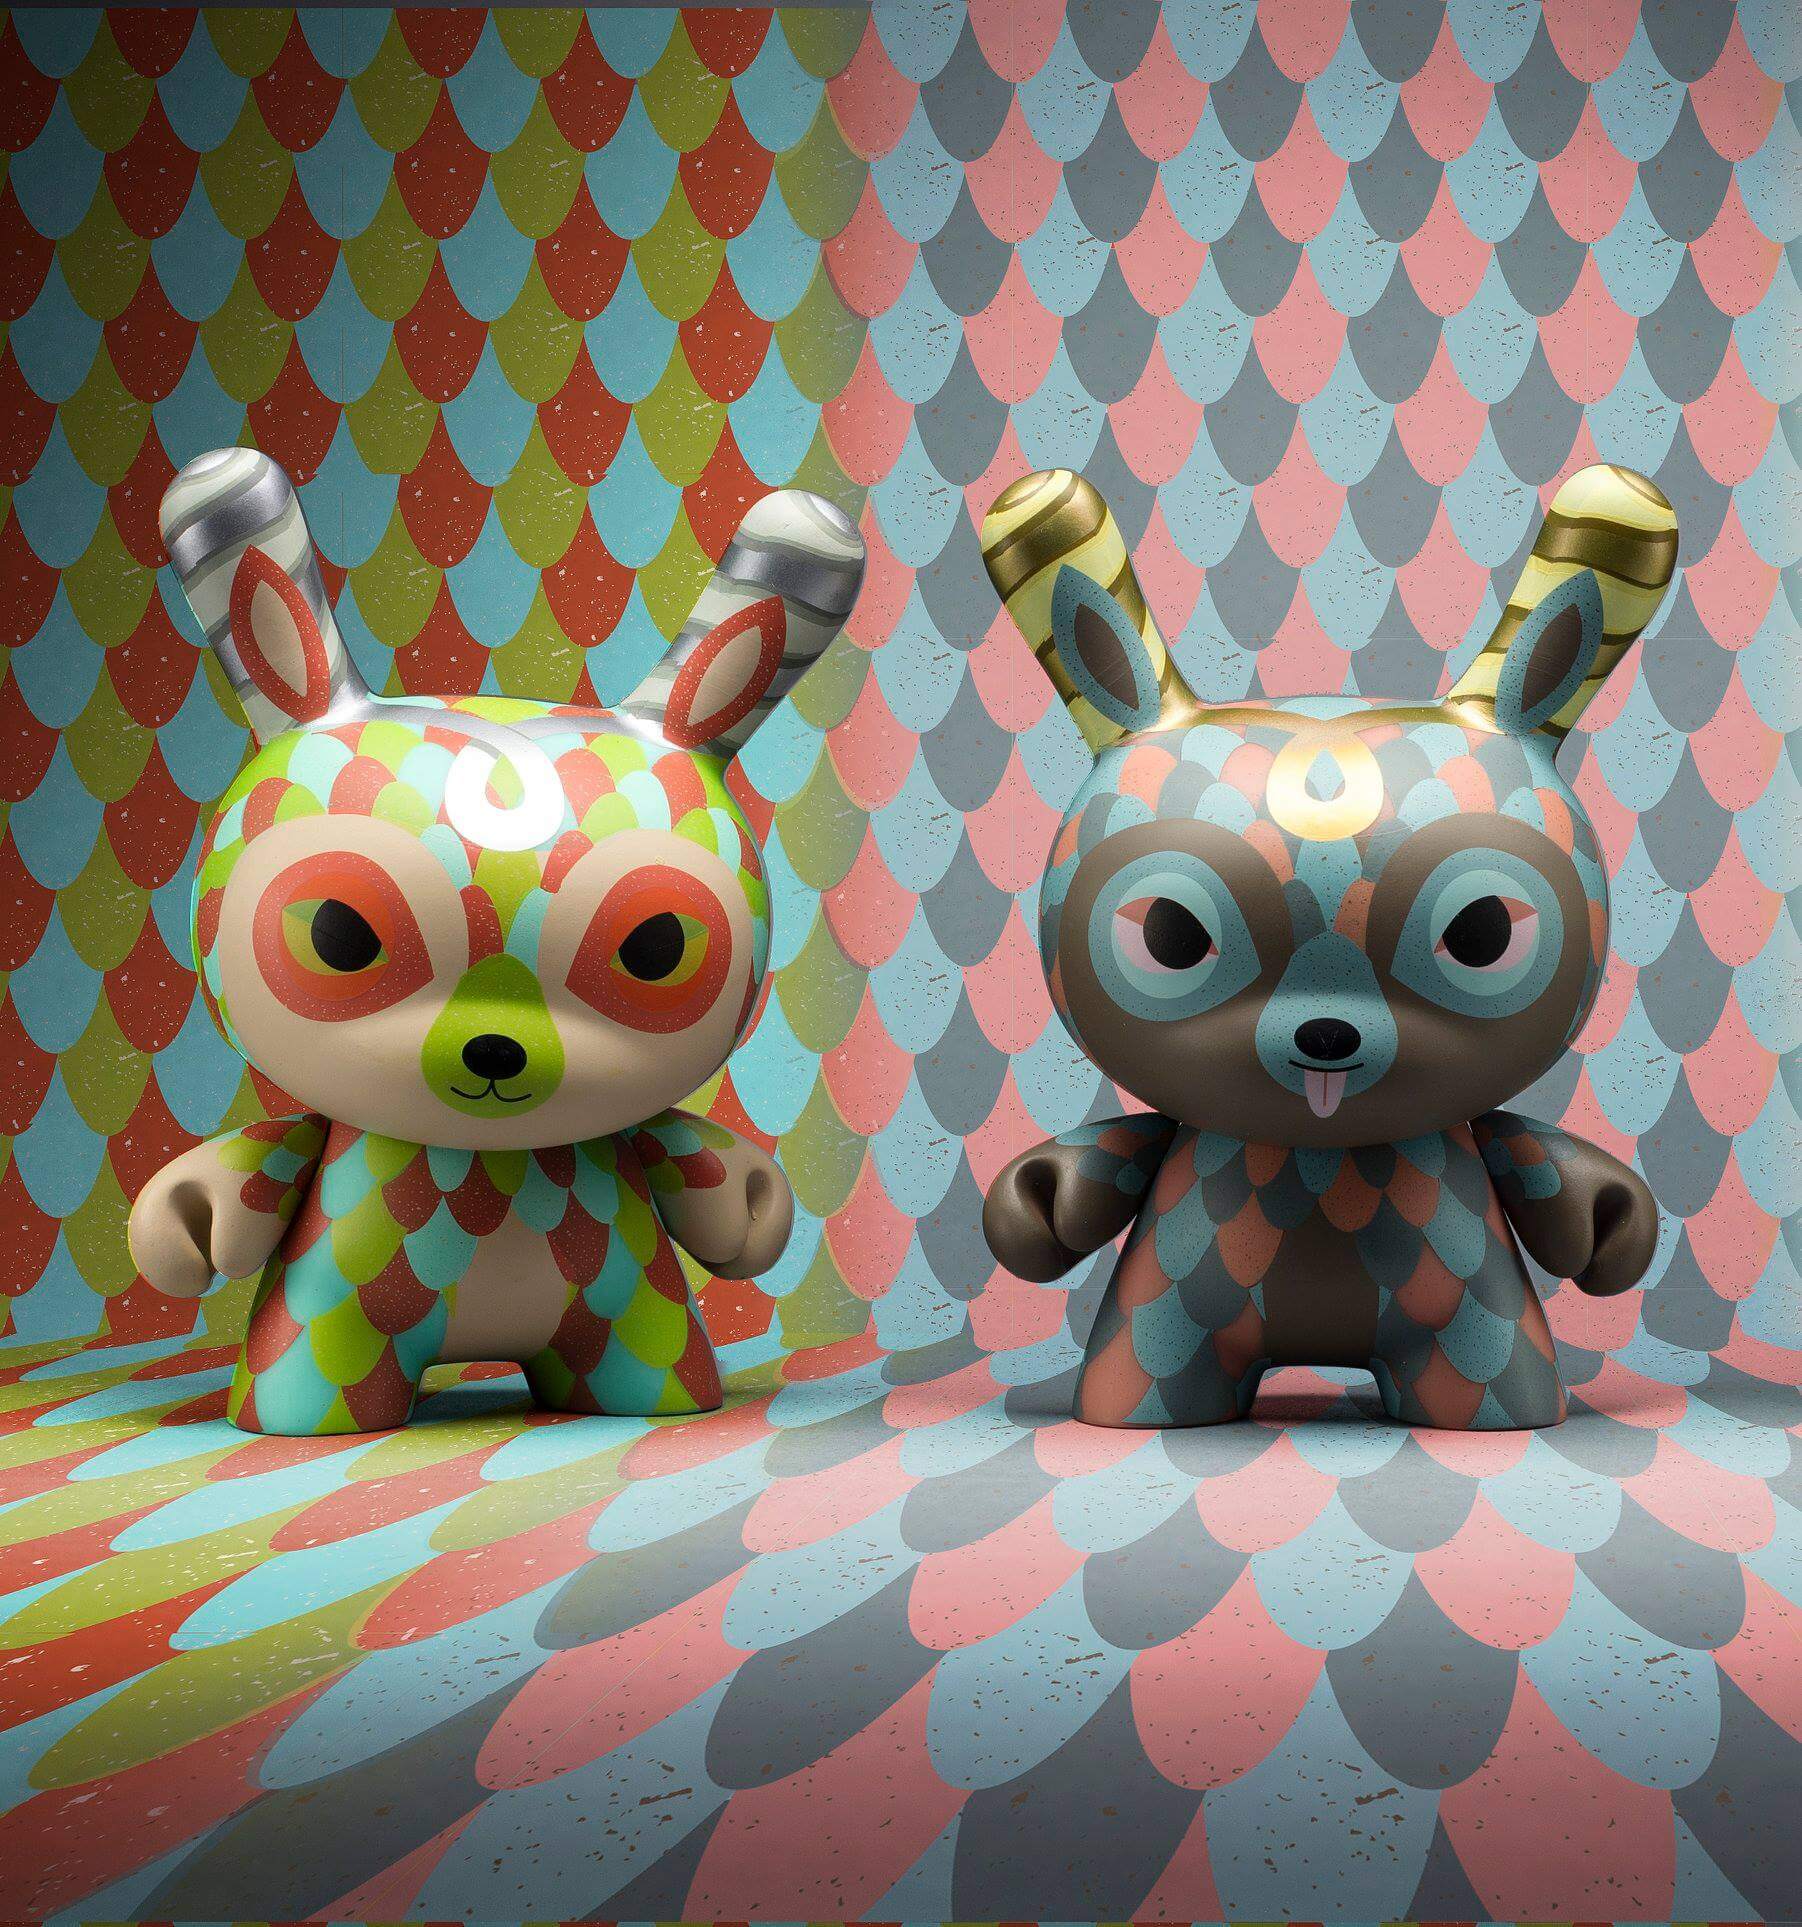 curly-horned-dunnylope-horrible-adorables-kidrobot-dunny